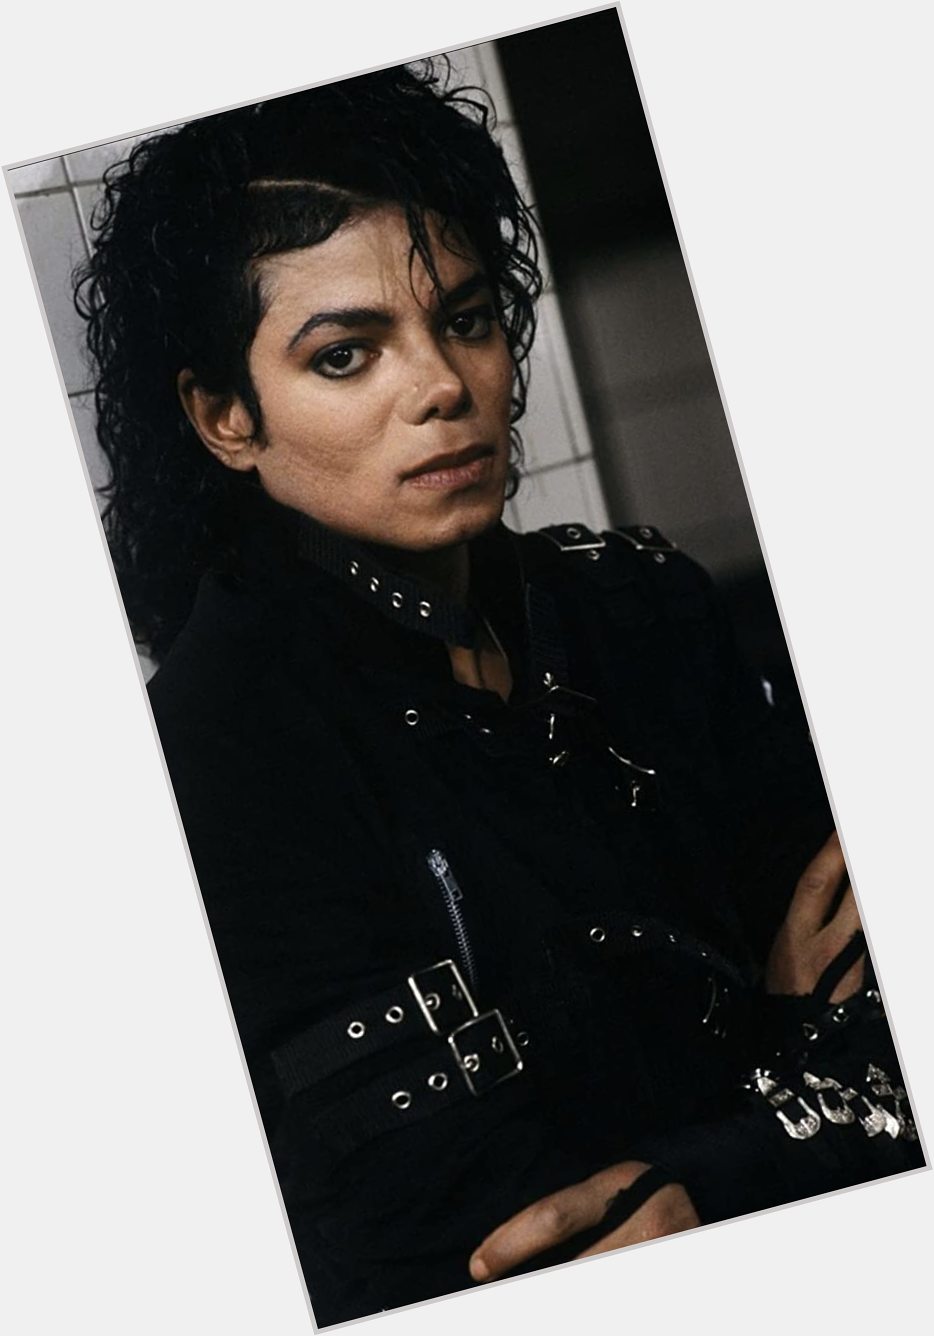 Happy birthday to the legend Michael Jackson!! 
Rest in Power 